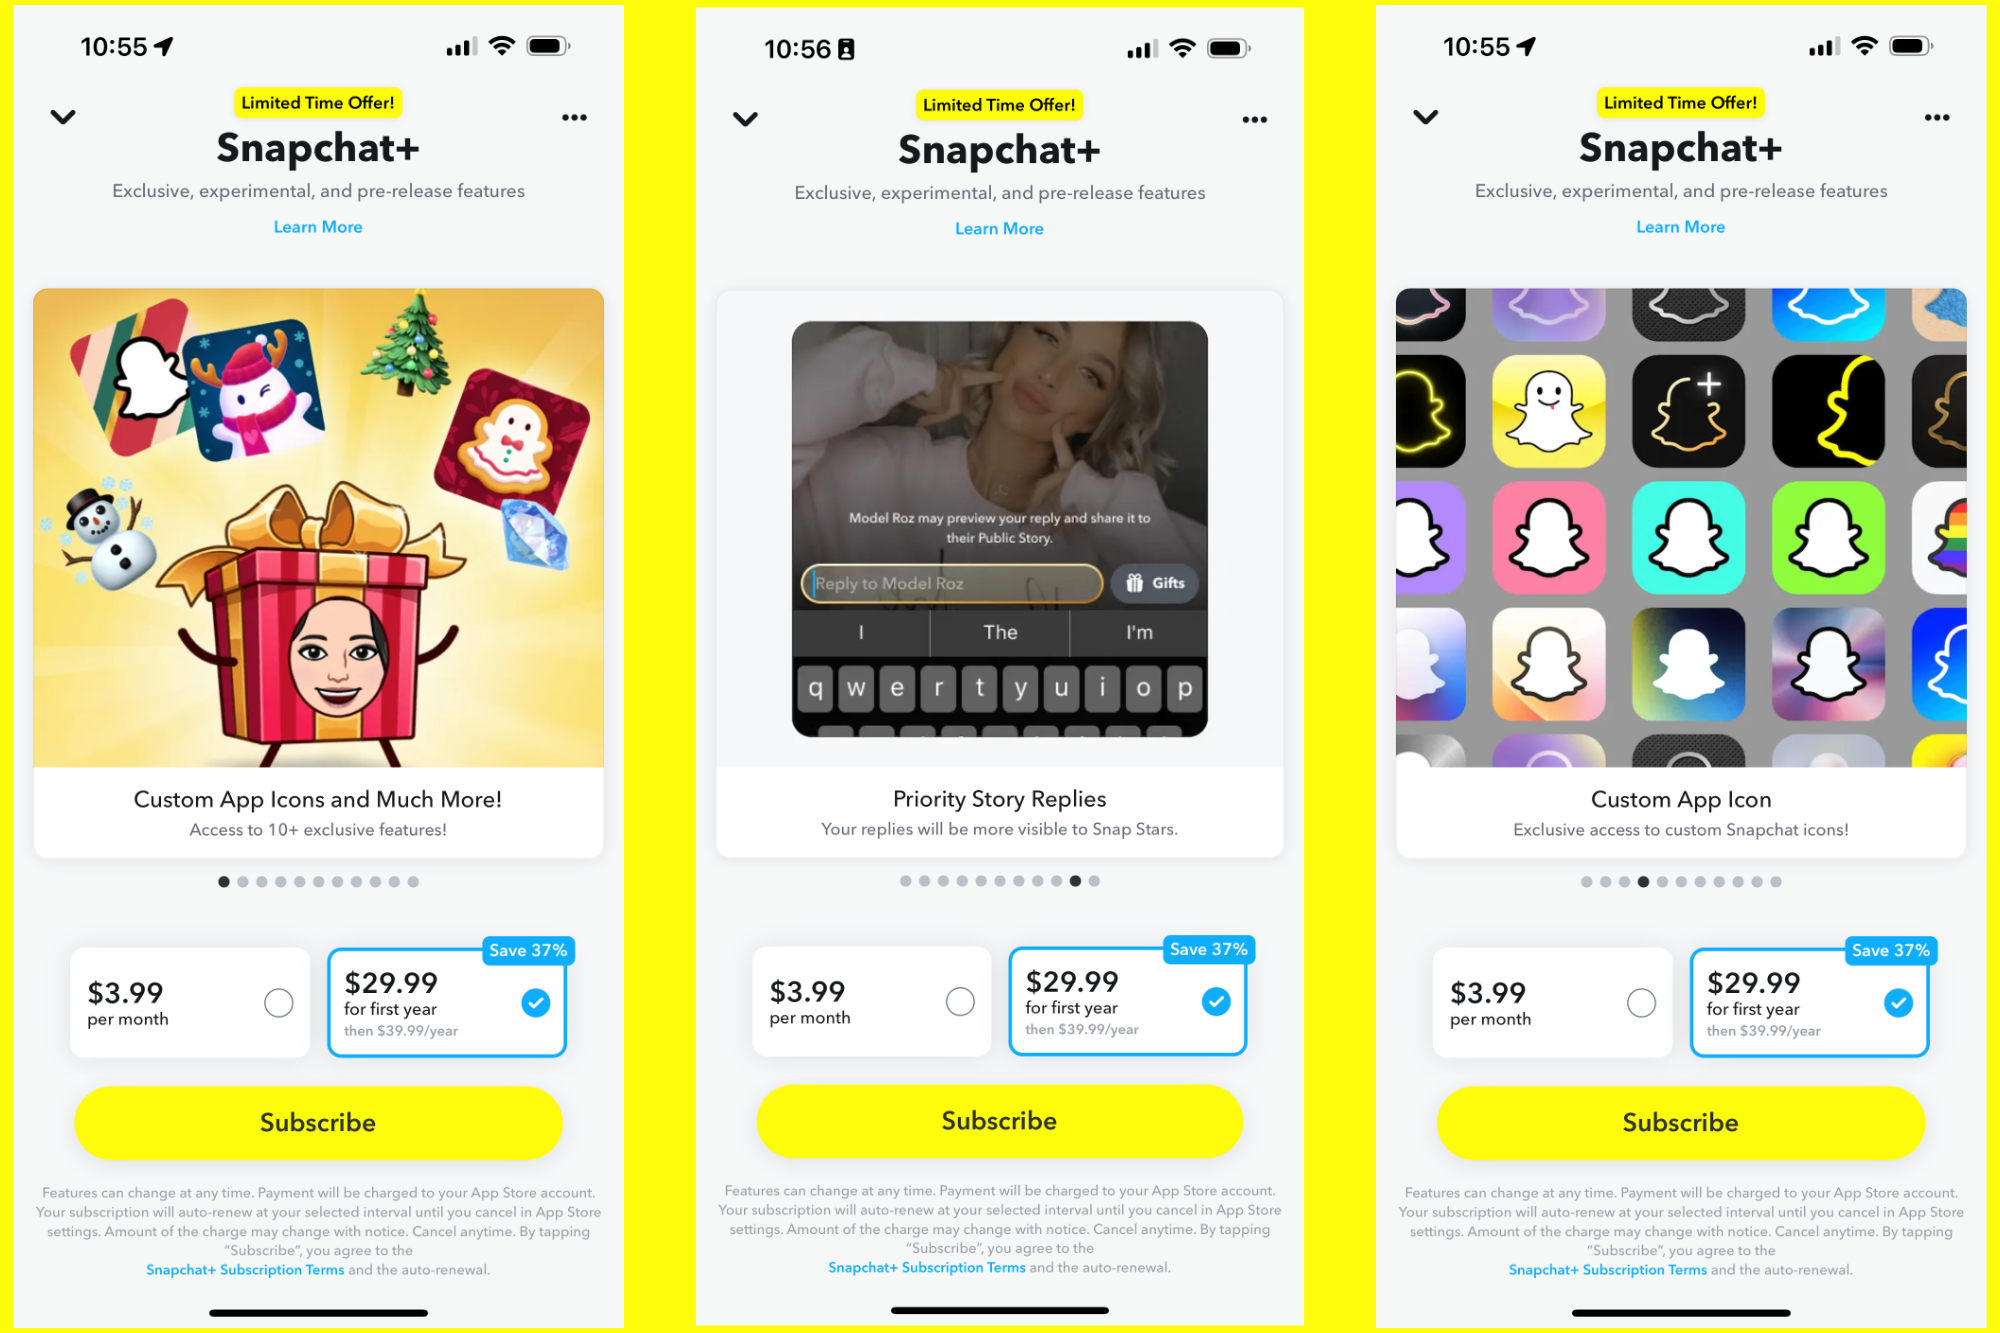 Screenshots of Snapchat Plus and some of its features.